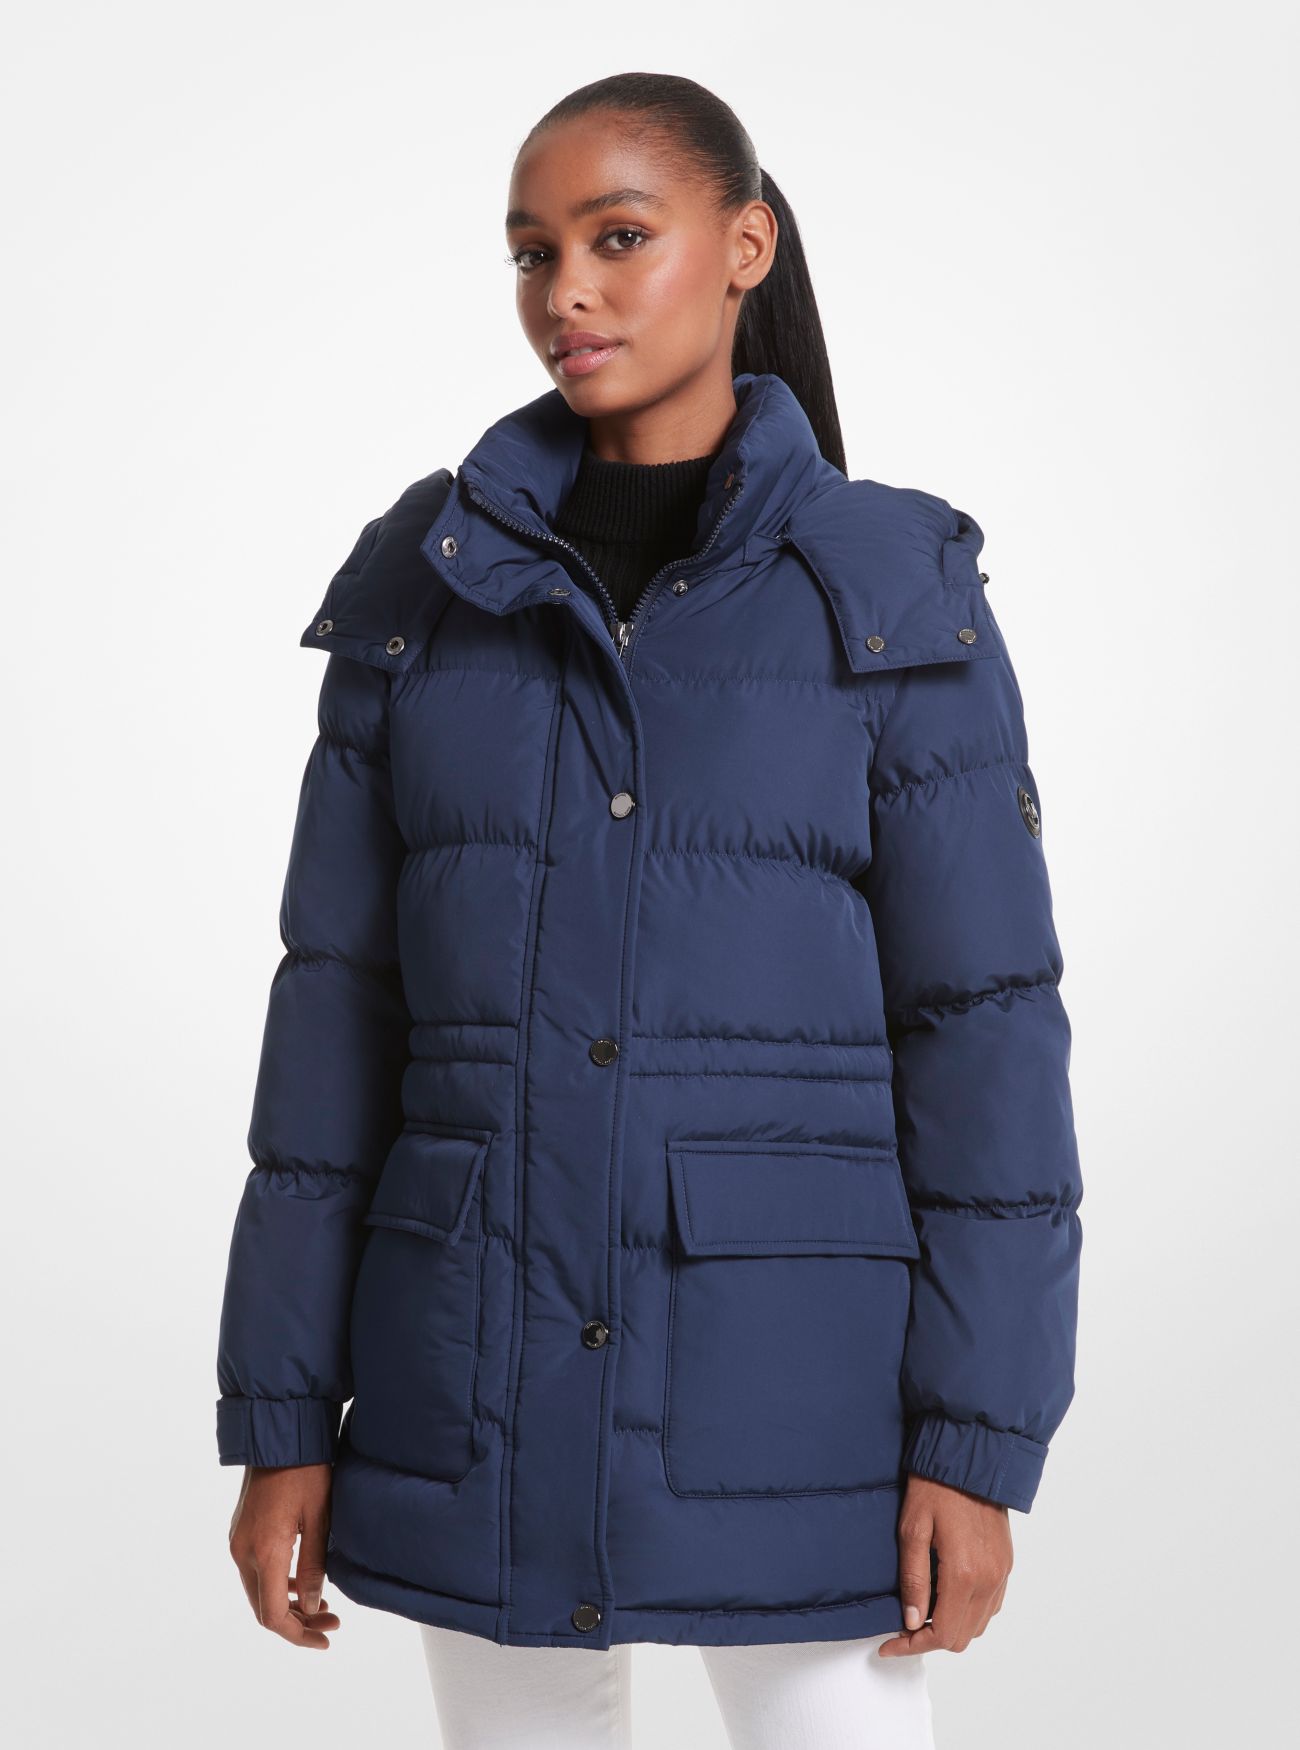 MK Quilted Puffer Jacket - Blue - Michael Kors